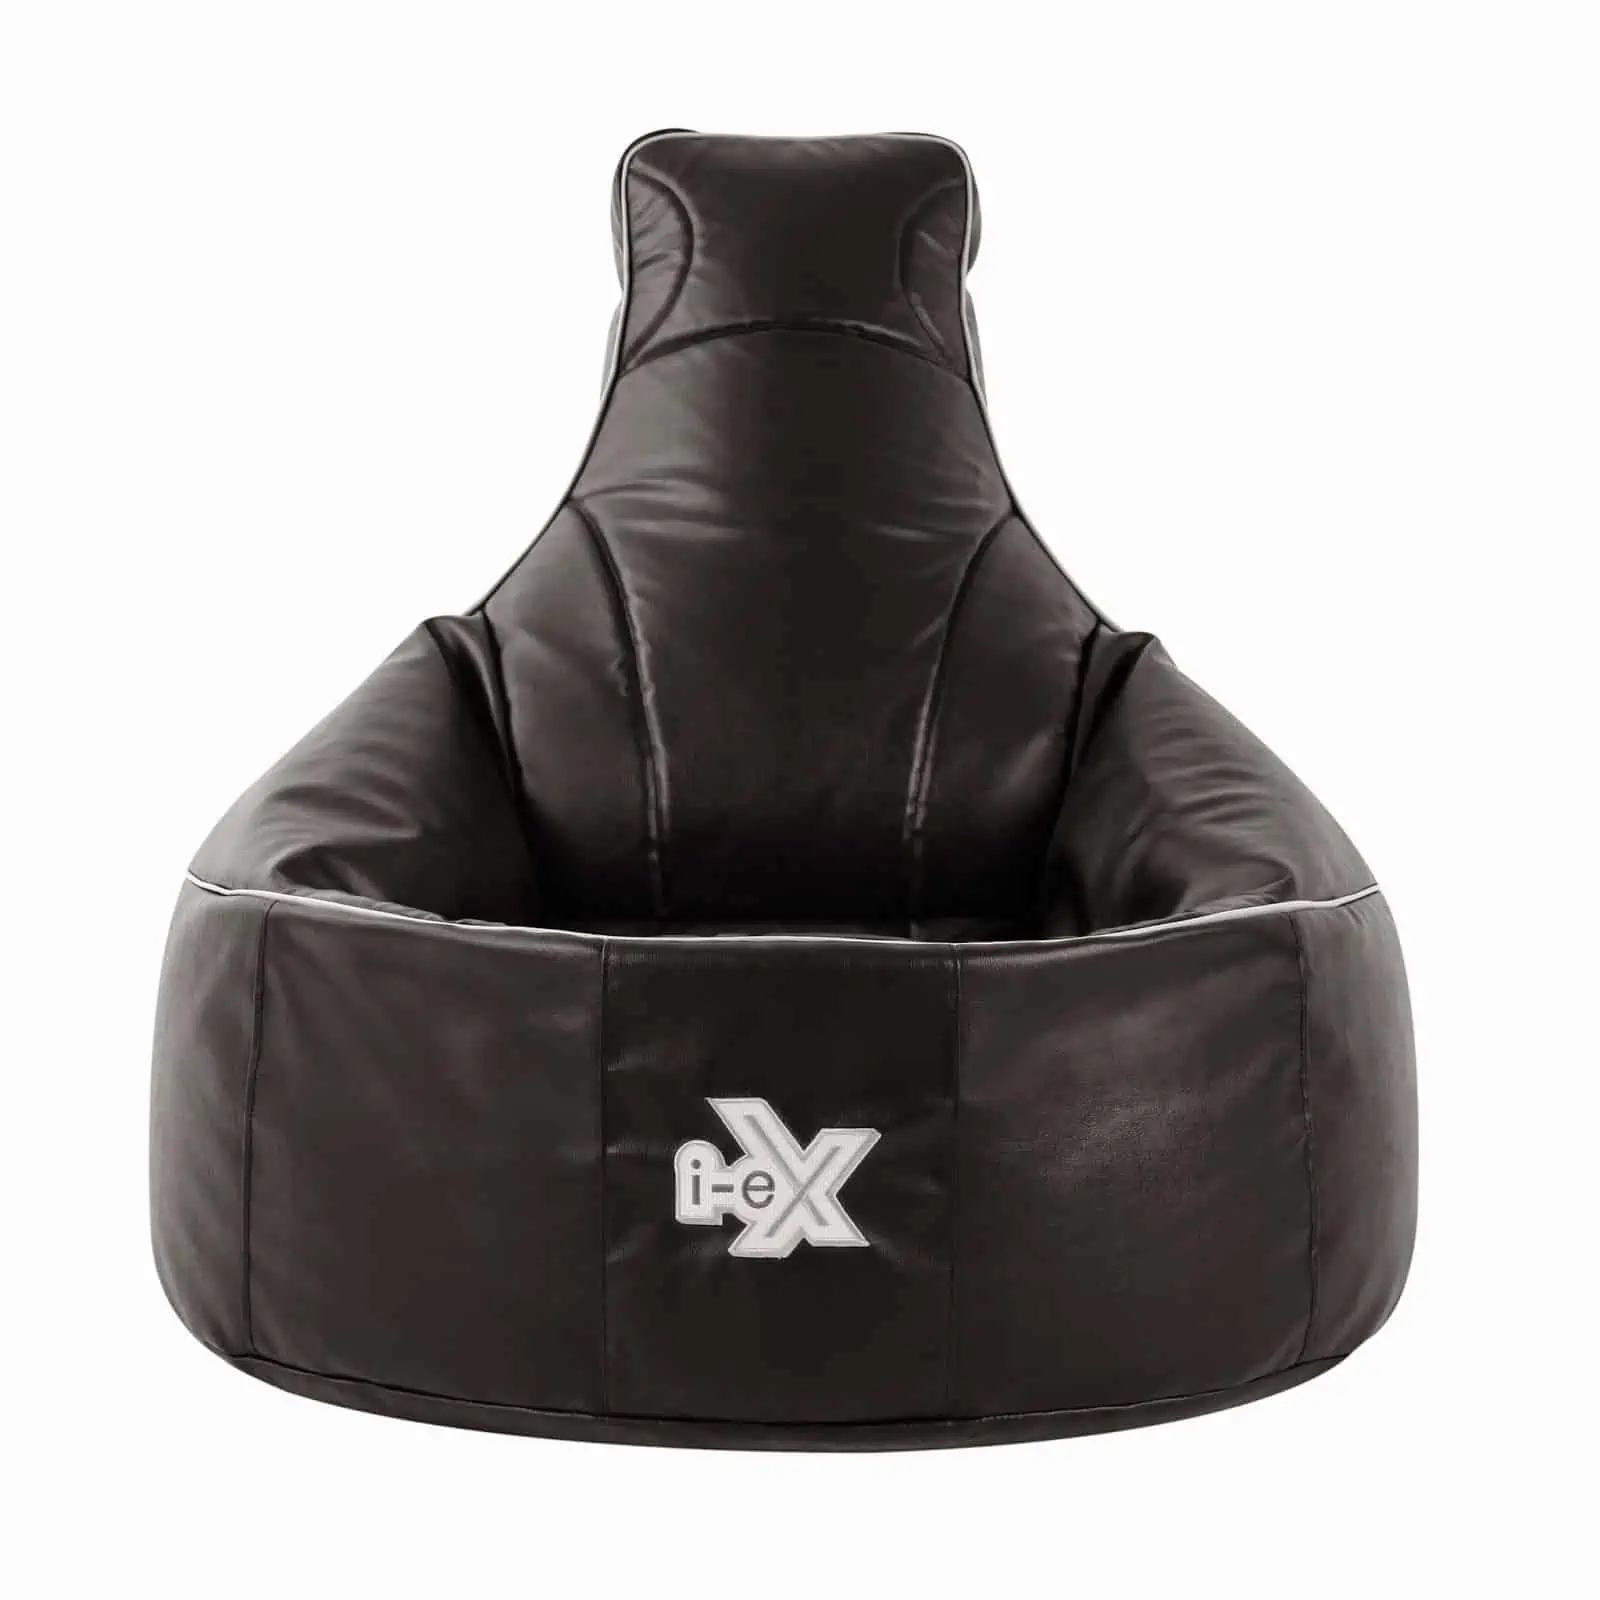 Superior gamer chair in black